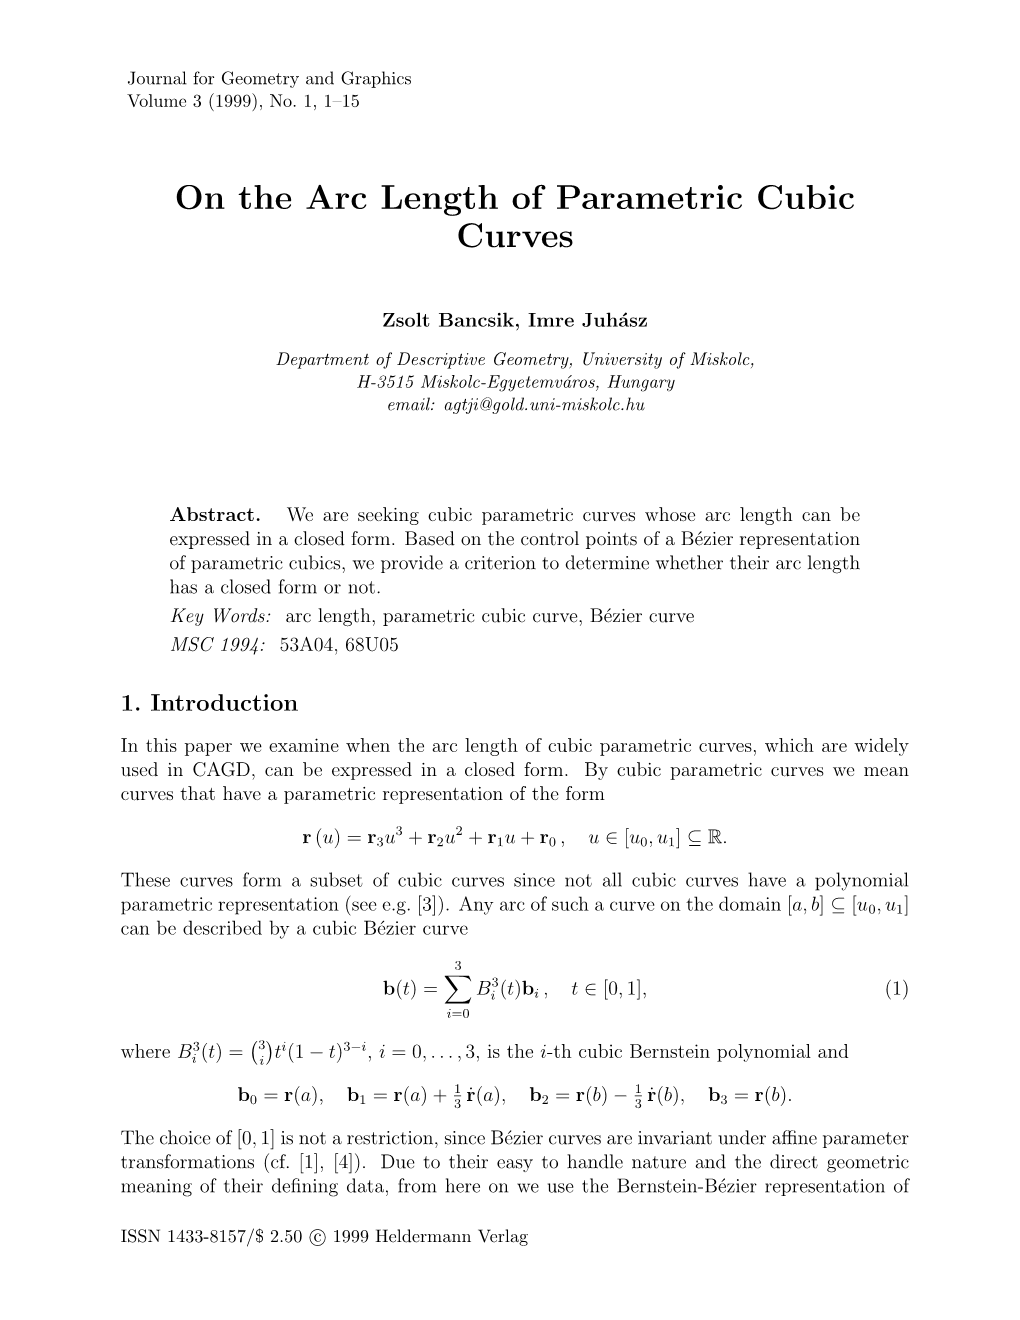 On the Arc Length of Parametric Cubic Curves